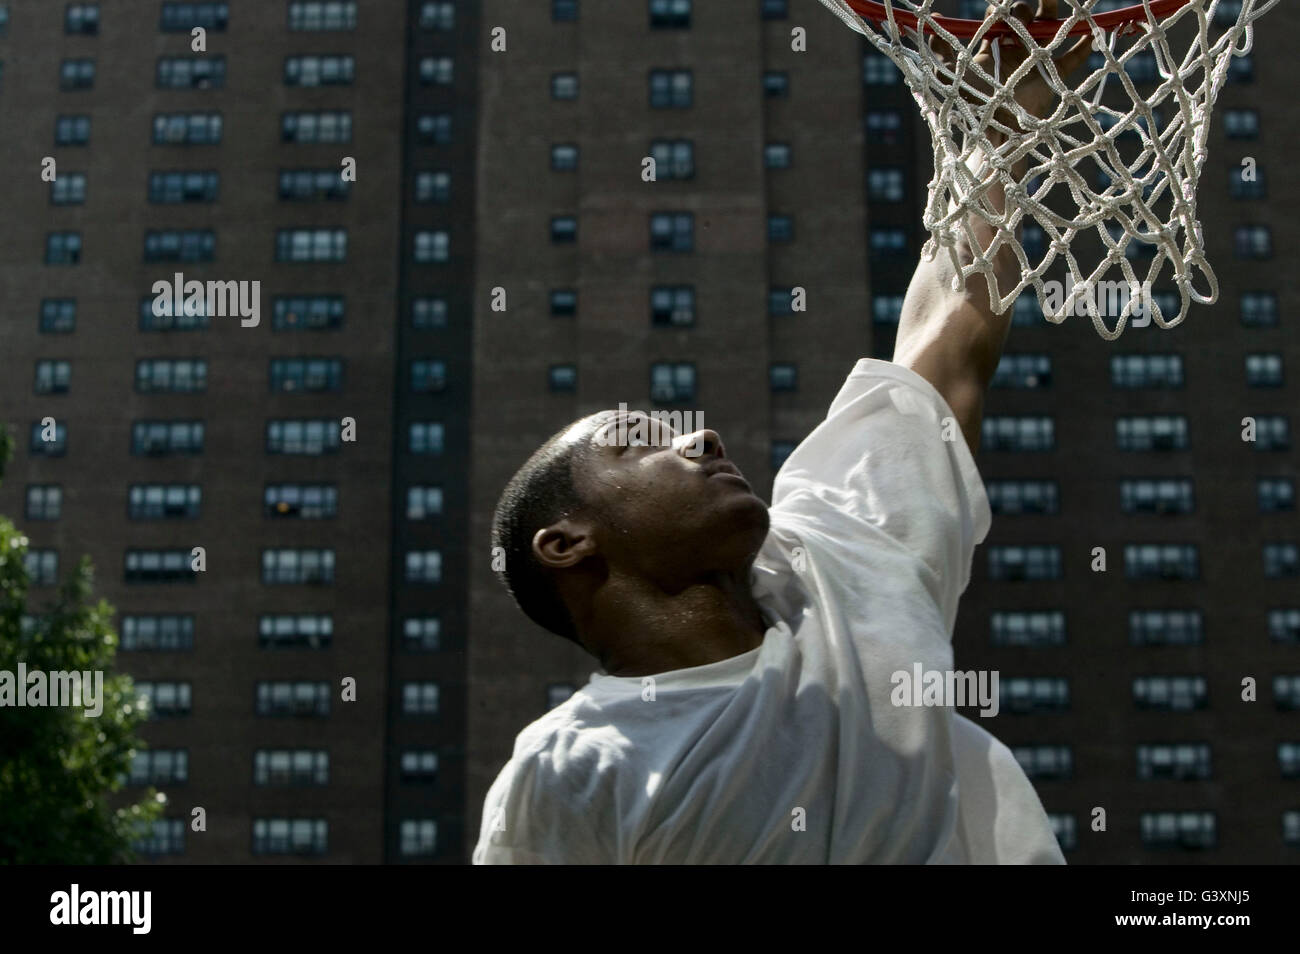 Player makes basket during tryouts for Rucker's basketball tournament, Rucker Park in Harlem, New York City, US, 12 June 2005 Stock Photo